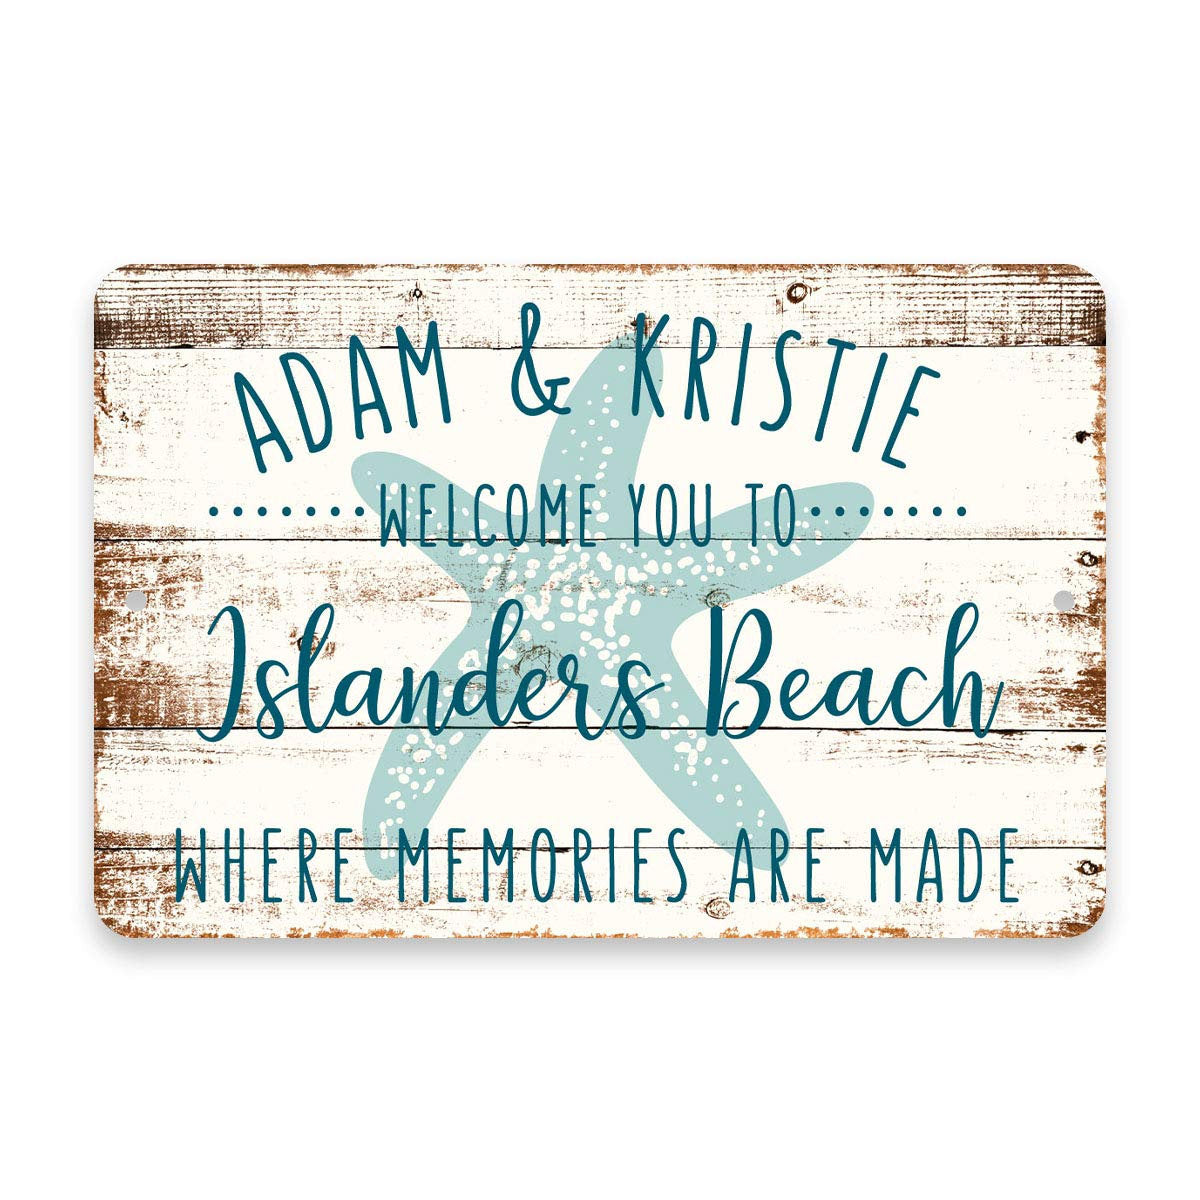 Personalized Welcome to Islanders Beach Where Memories are Made Sign - 8 X 12 Metal Sign with Wood Look